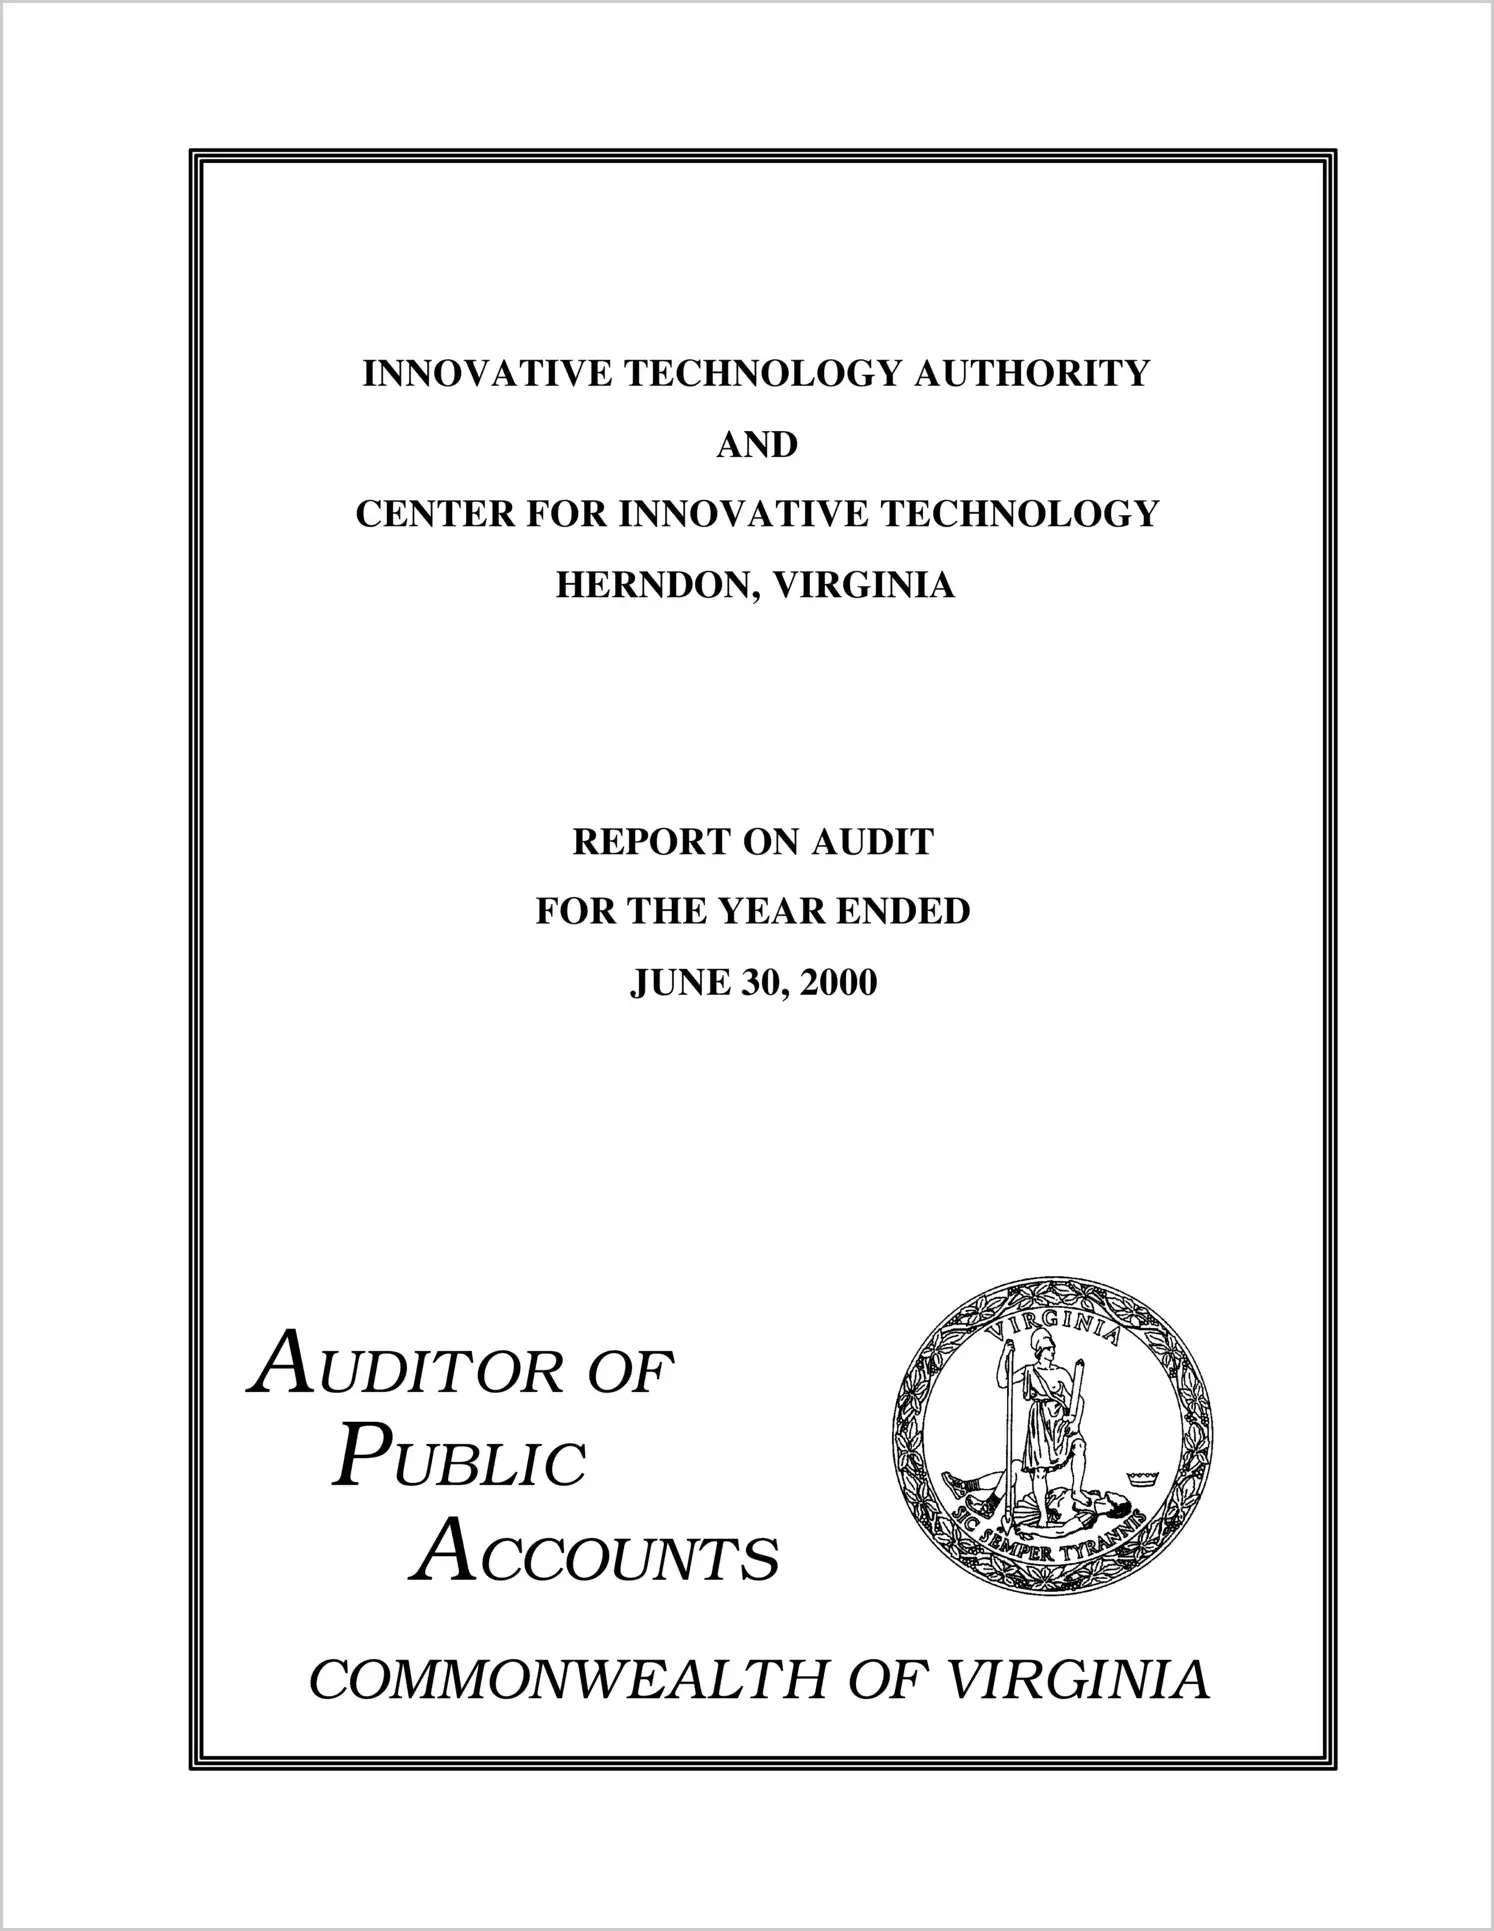 Innovative Technology Authority and the Center for Innovative Technology for the year ended June 30, 2000